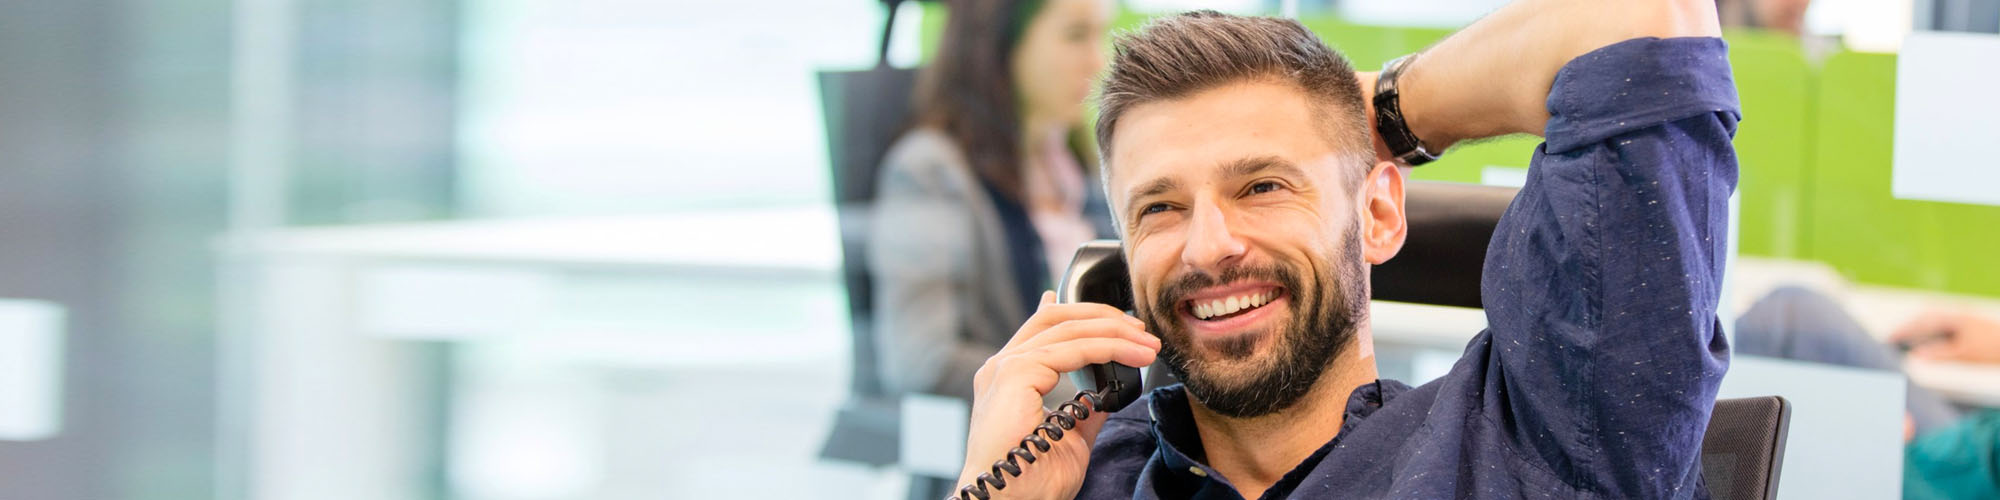 Business Phone Services Man on VOIP